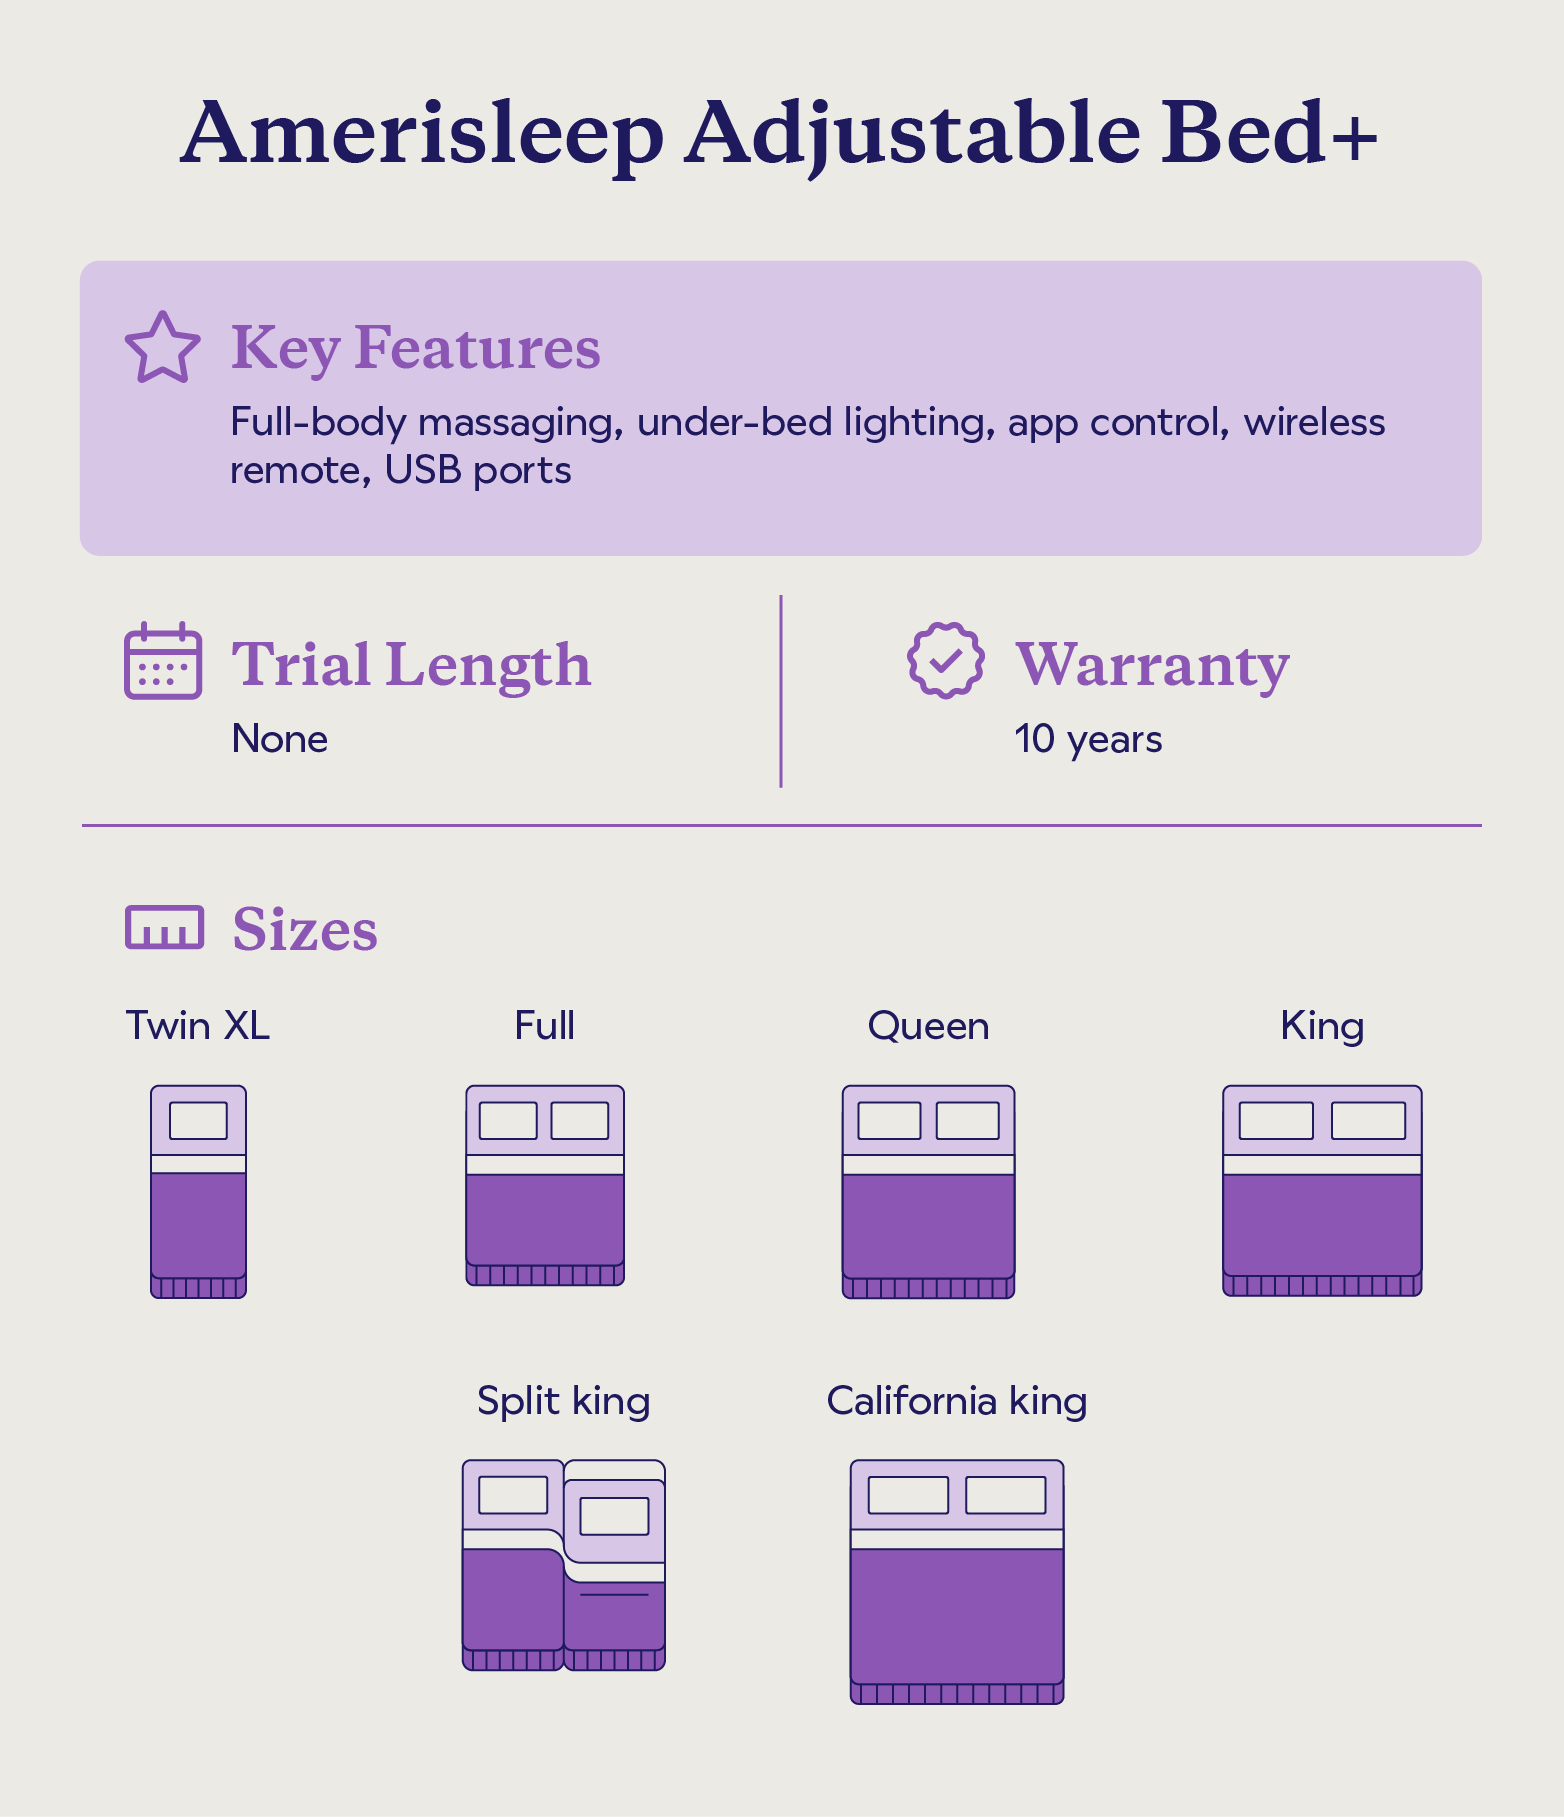 Key features and sizes of the Amerisleep Adjustable Bed+.